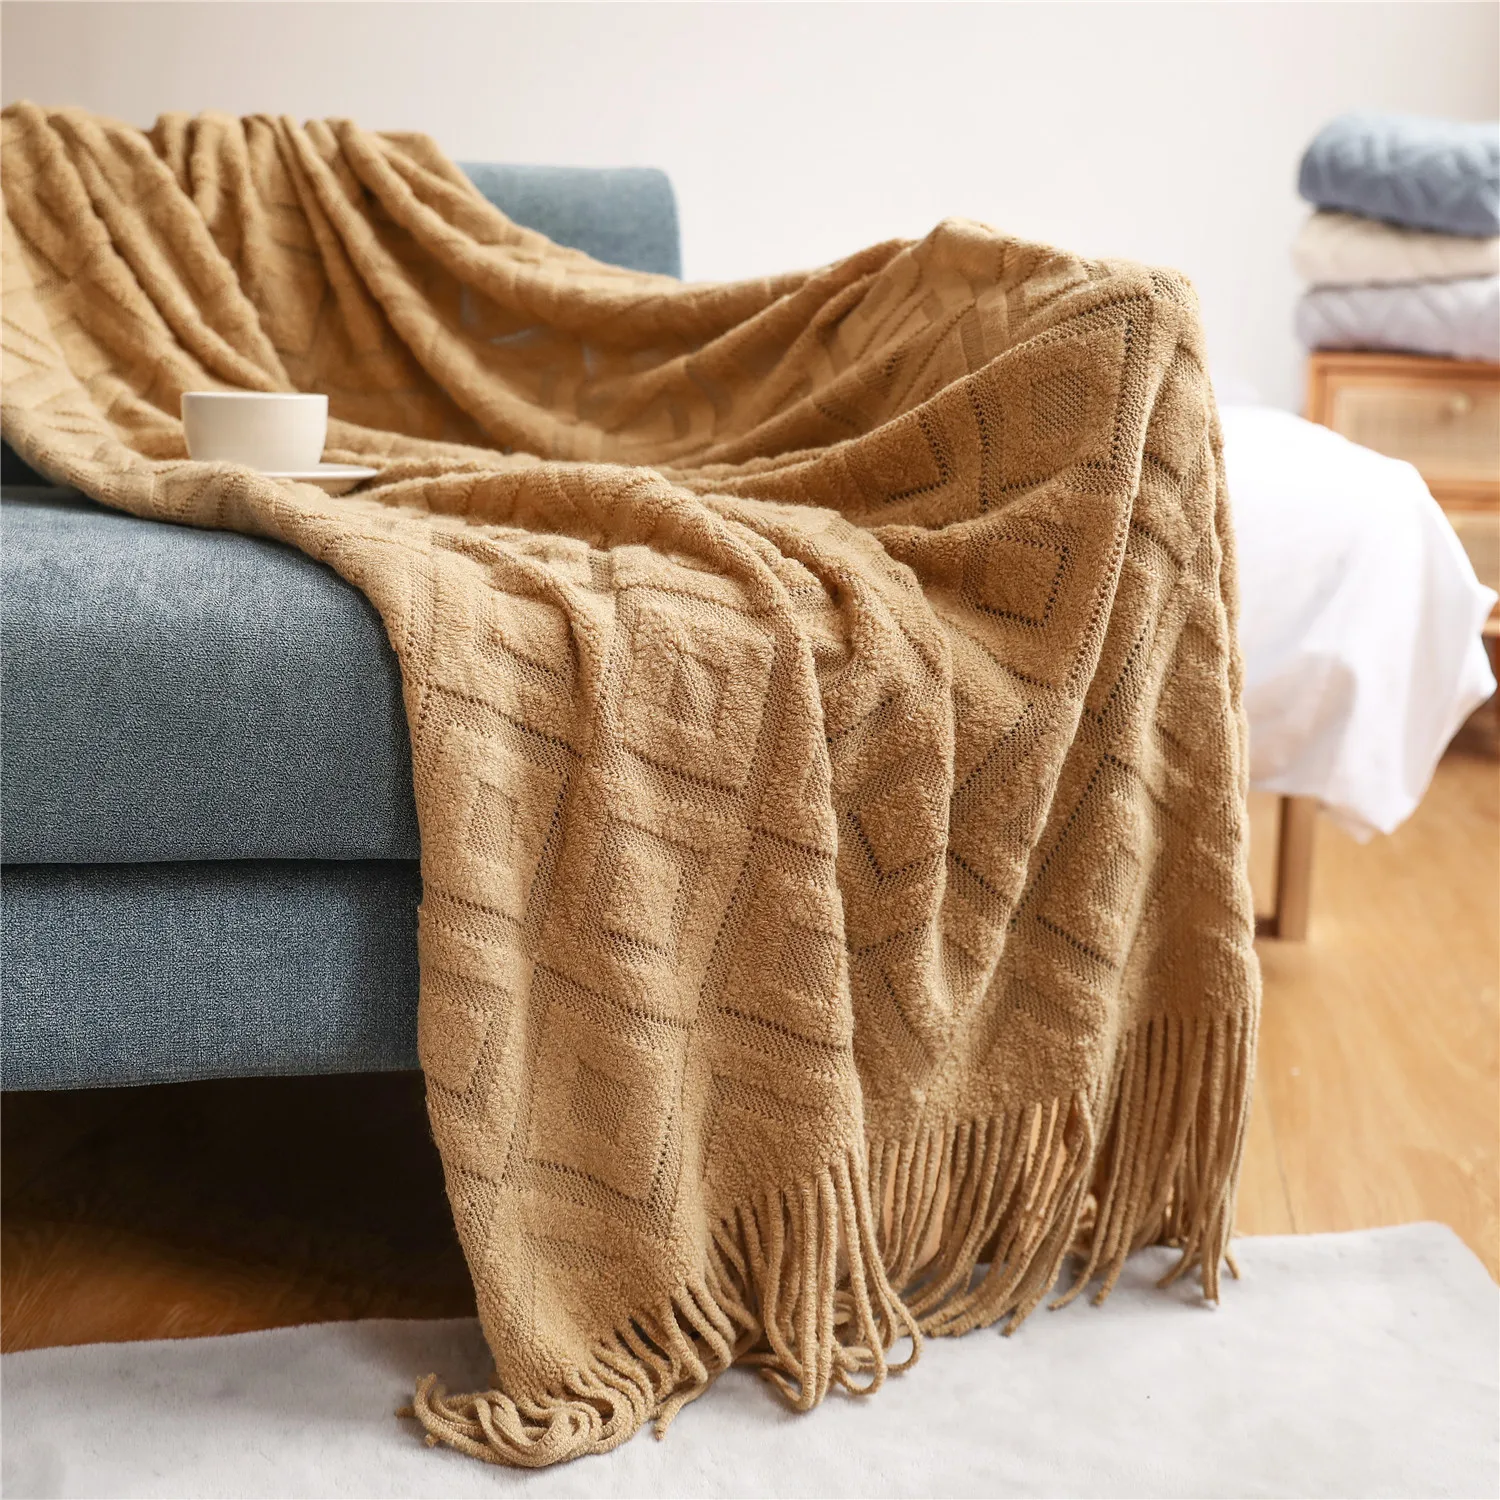 

Textured Knitted Super Soft Throw Blanket with Tassels - Warm Fluffy Cozy Plush Knit - for Fall Couch Bed Sofa Living Room Decor